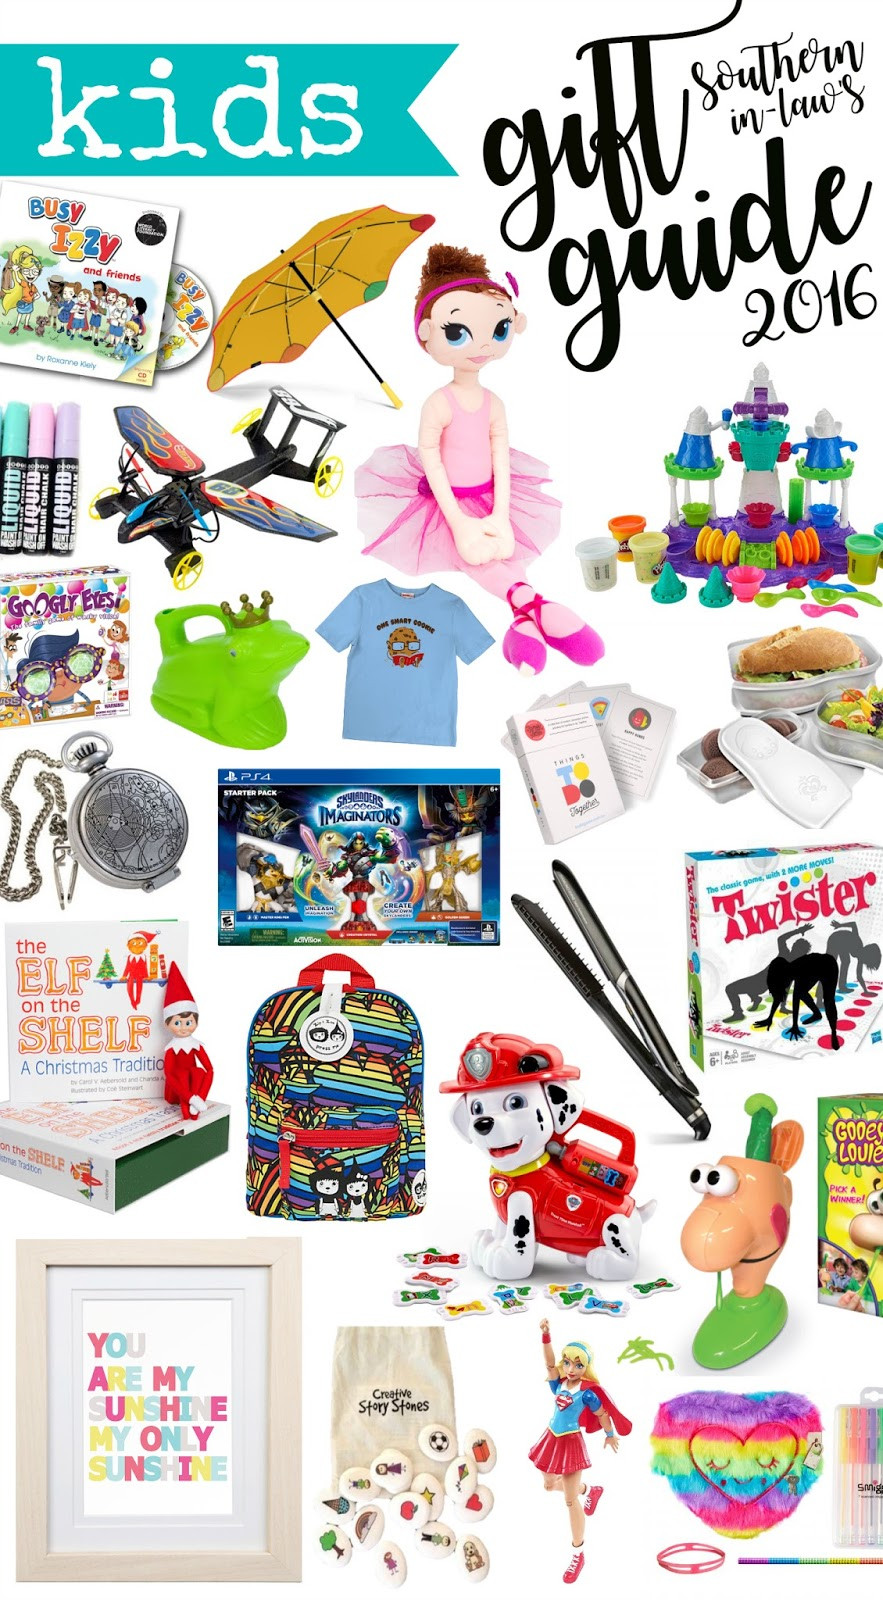 Christmas Gifts From Toddlers
 Southern In Law 2016 Kids Christmas Gift Guide